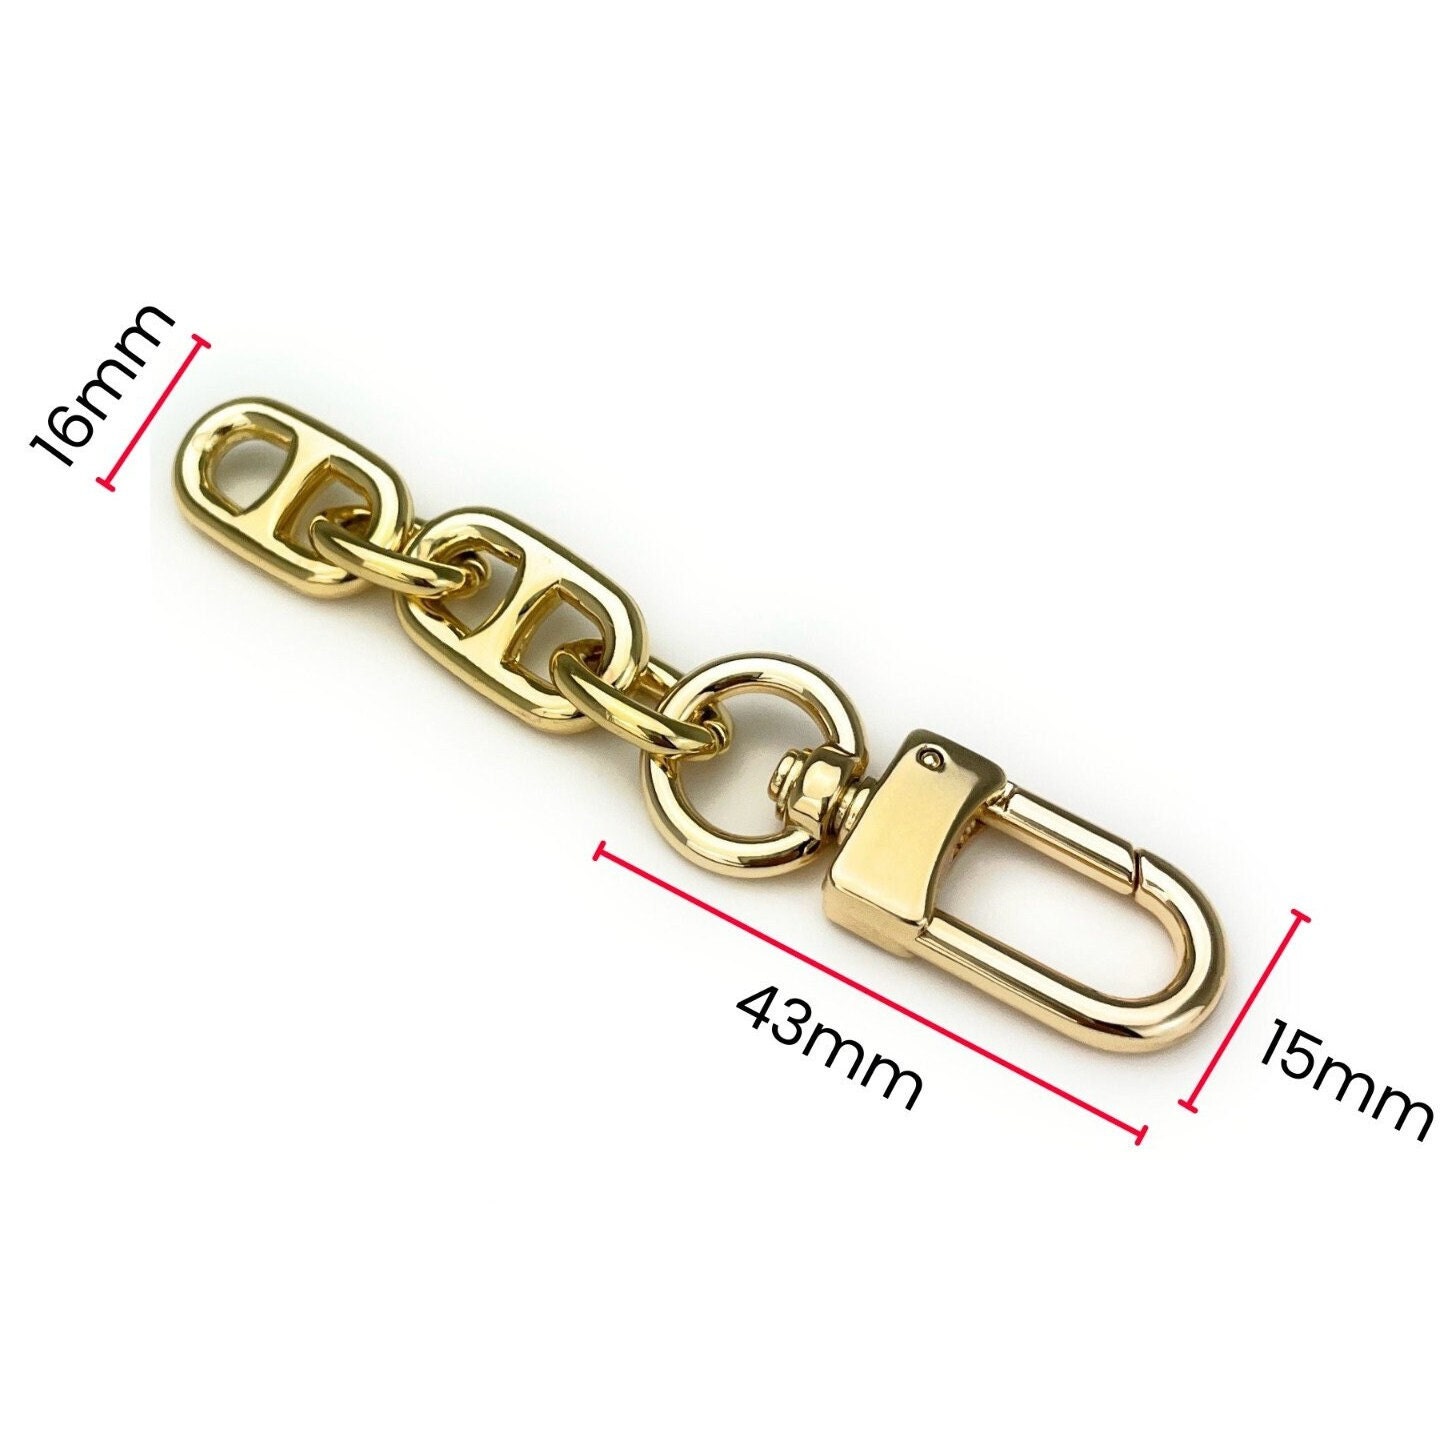 Purse Chain Extender Key Charm Clasp Key Holder Select Your Style 